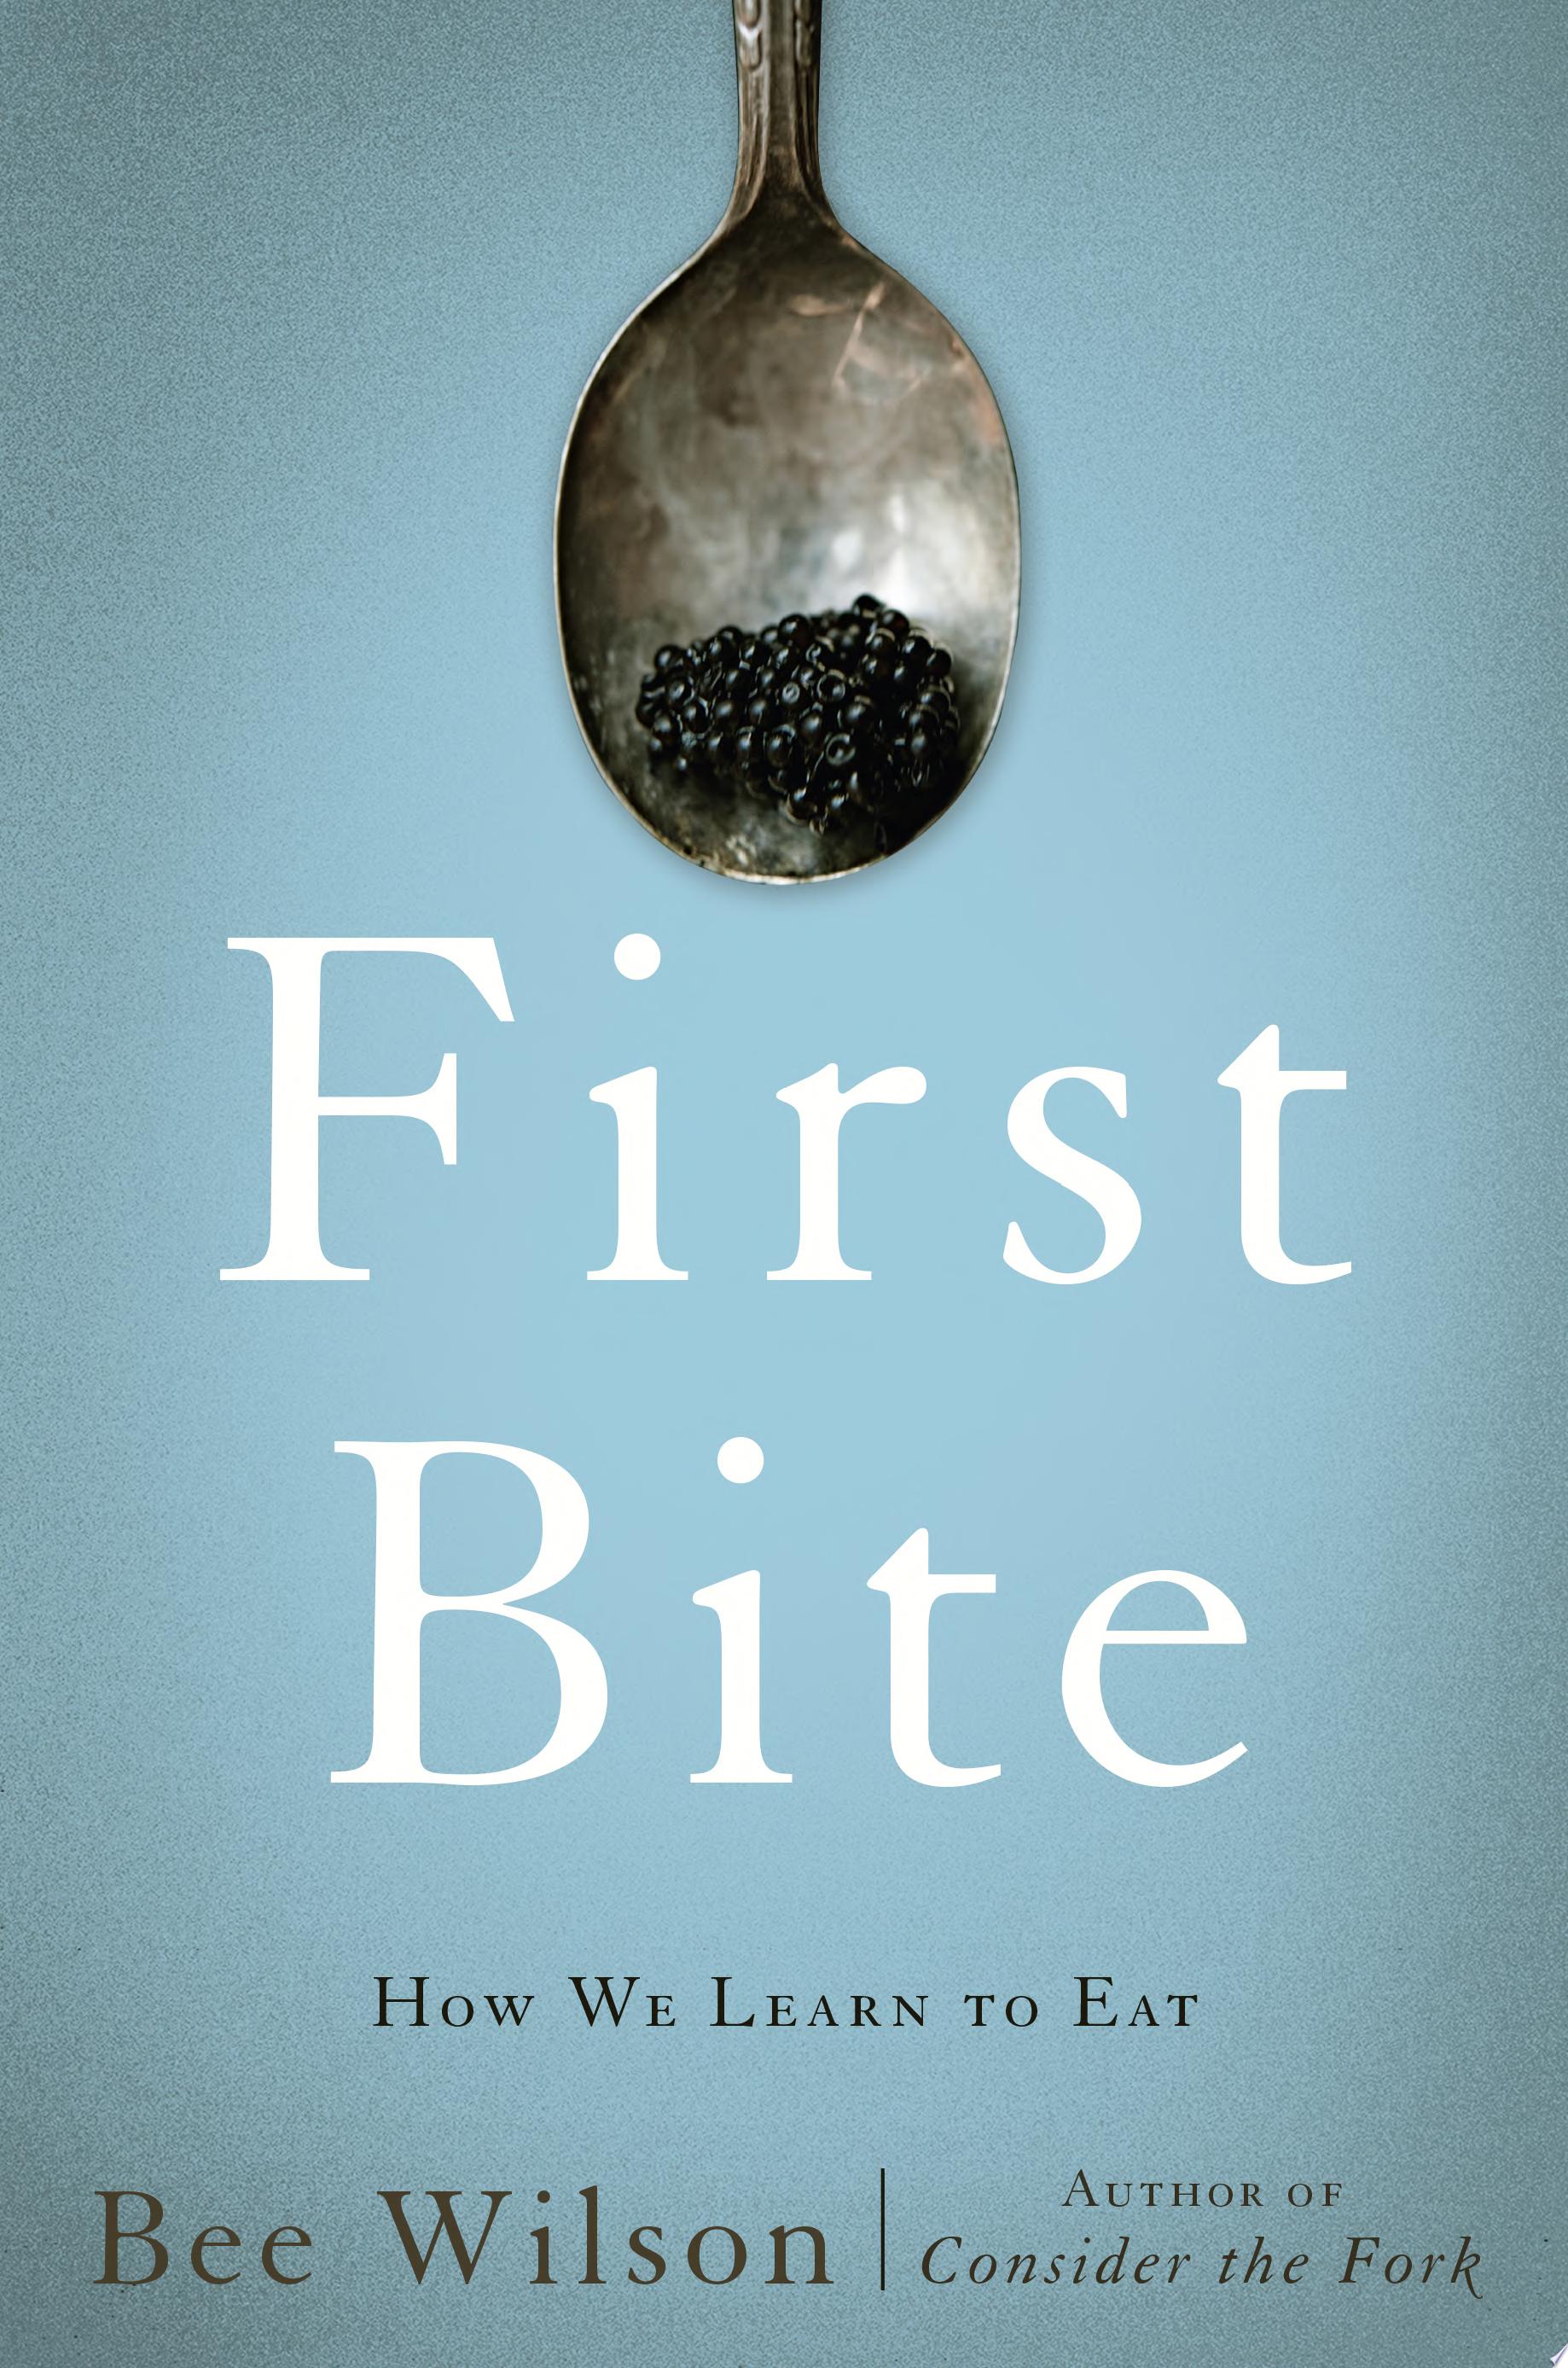 Image for "First Bite"